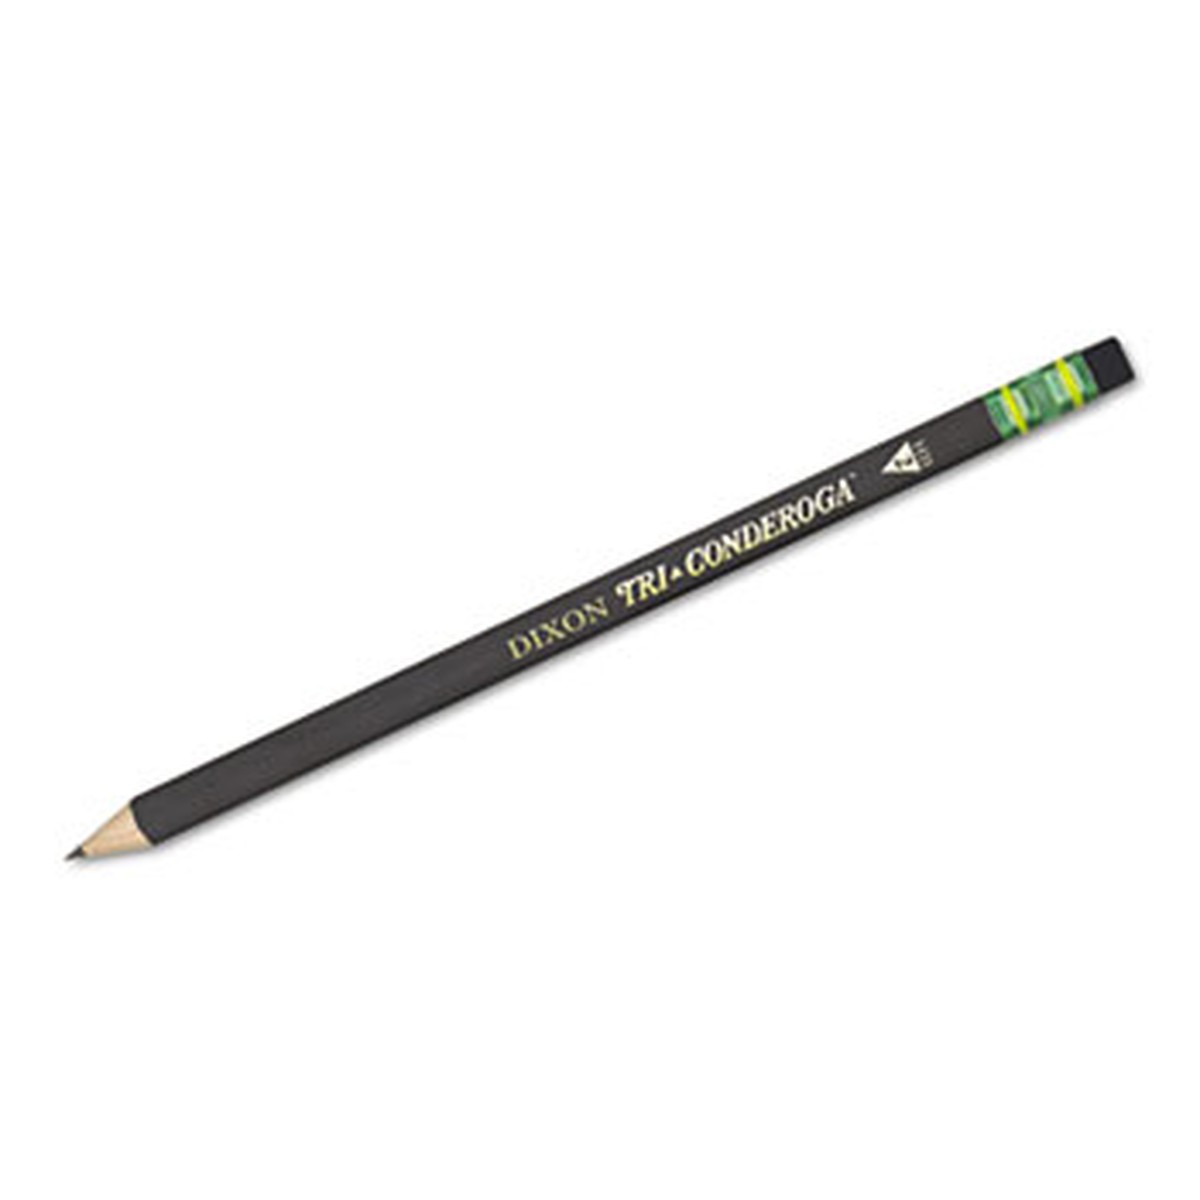 Tri-Conderoga 3-Sided Pencils with Sharpener, Pack of 12